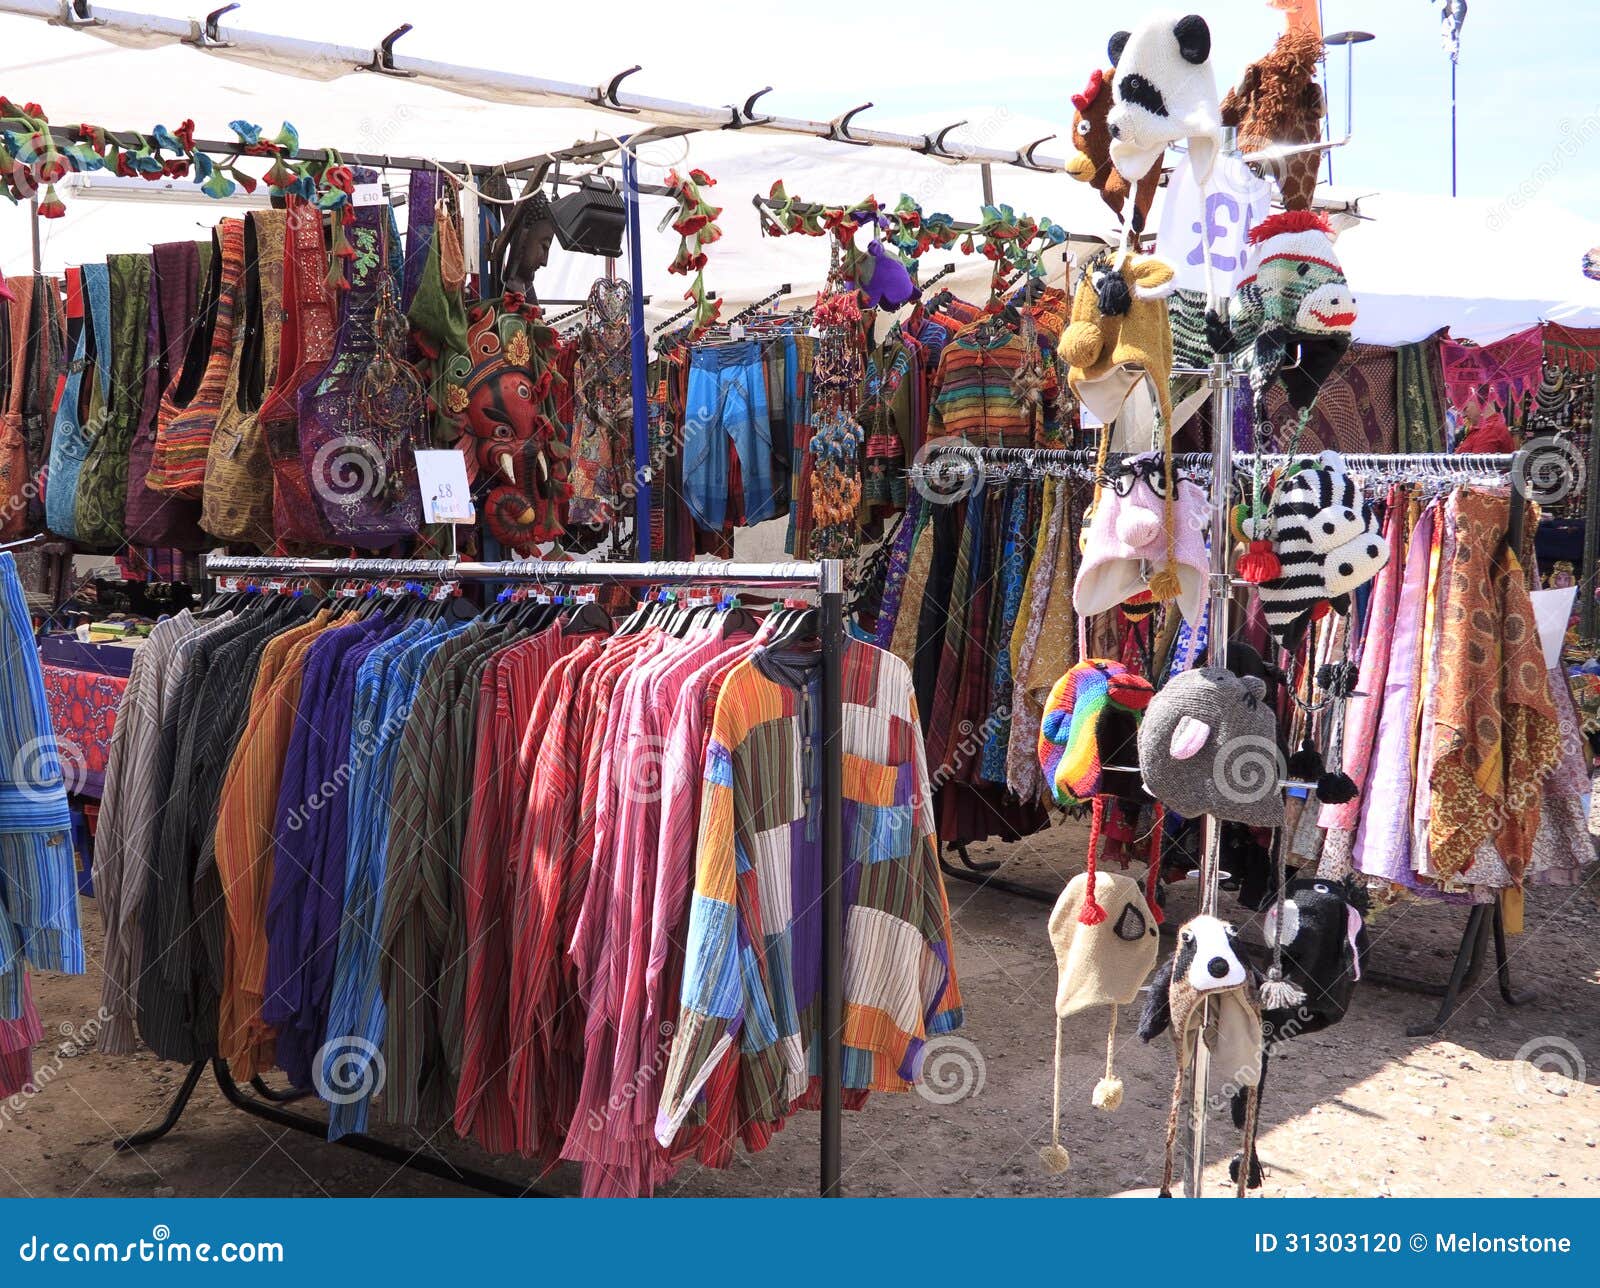 Festival Clothes Stall Stock Photo - Image: 31303120